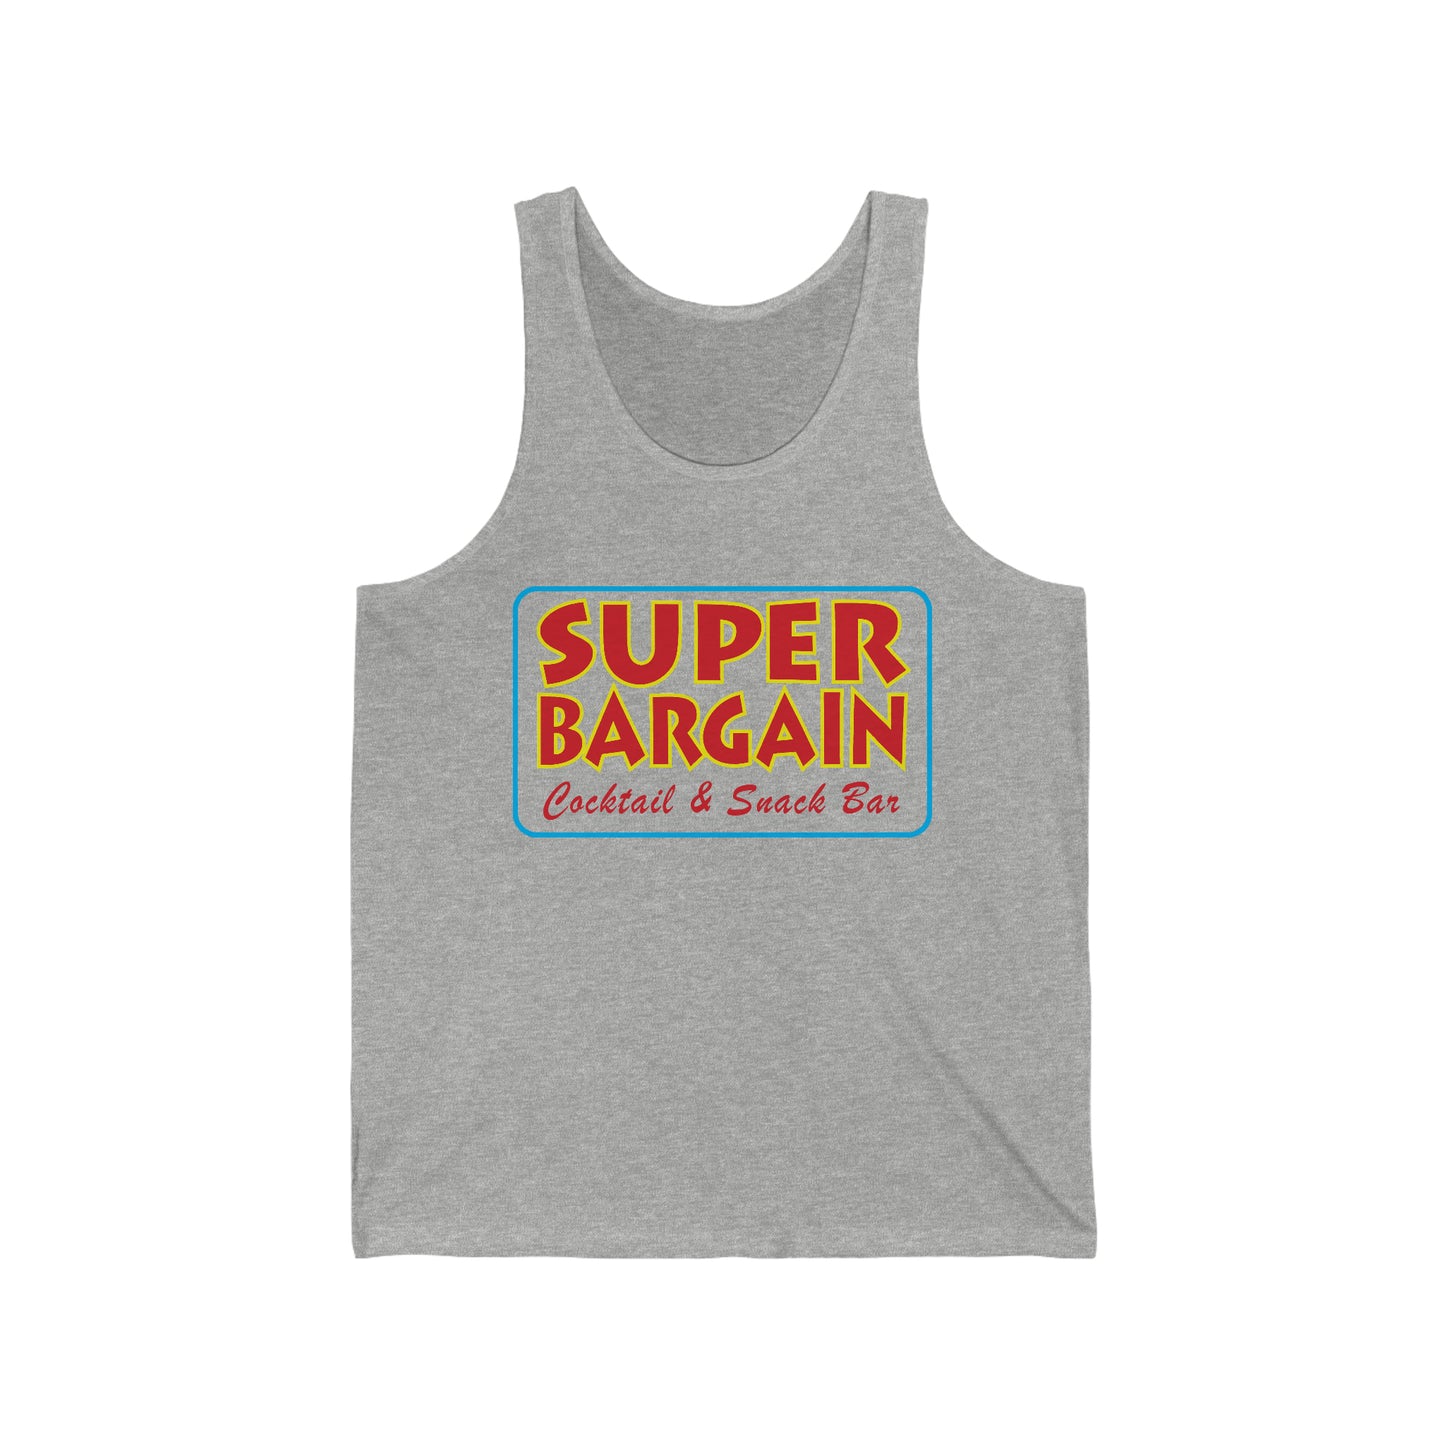 Printify Unisex Jersey Tank featuring a colorful logo that reads "SUPER BARGAIN Cocktail & Snack Bar, Cabbagetown Toronto" in retro style, positioned centrally on the chest area.